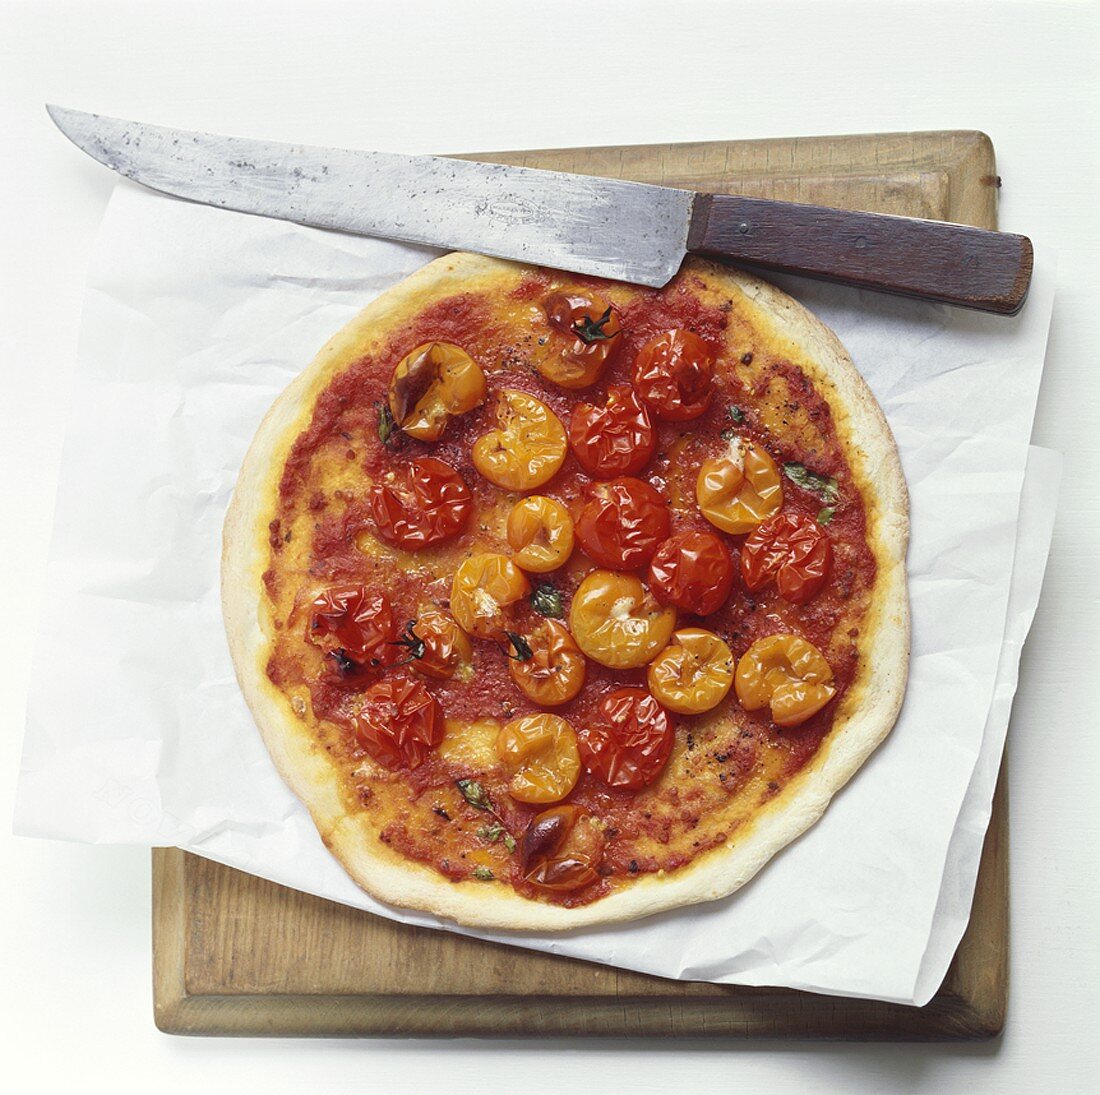 A tomato pizza (with cocktail tomatoes)